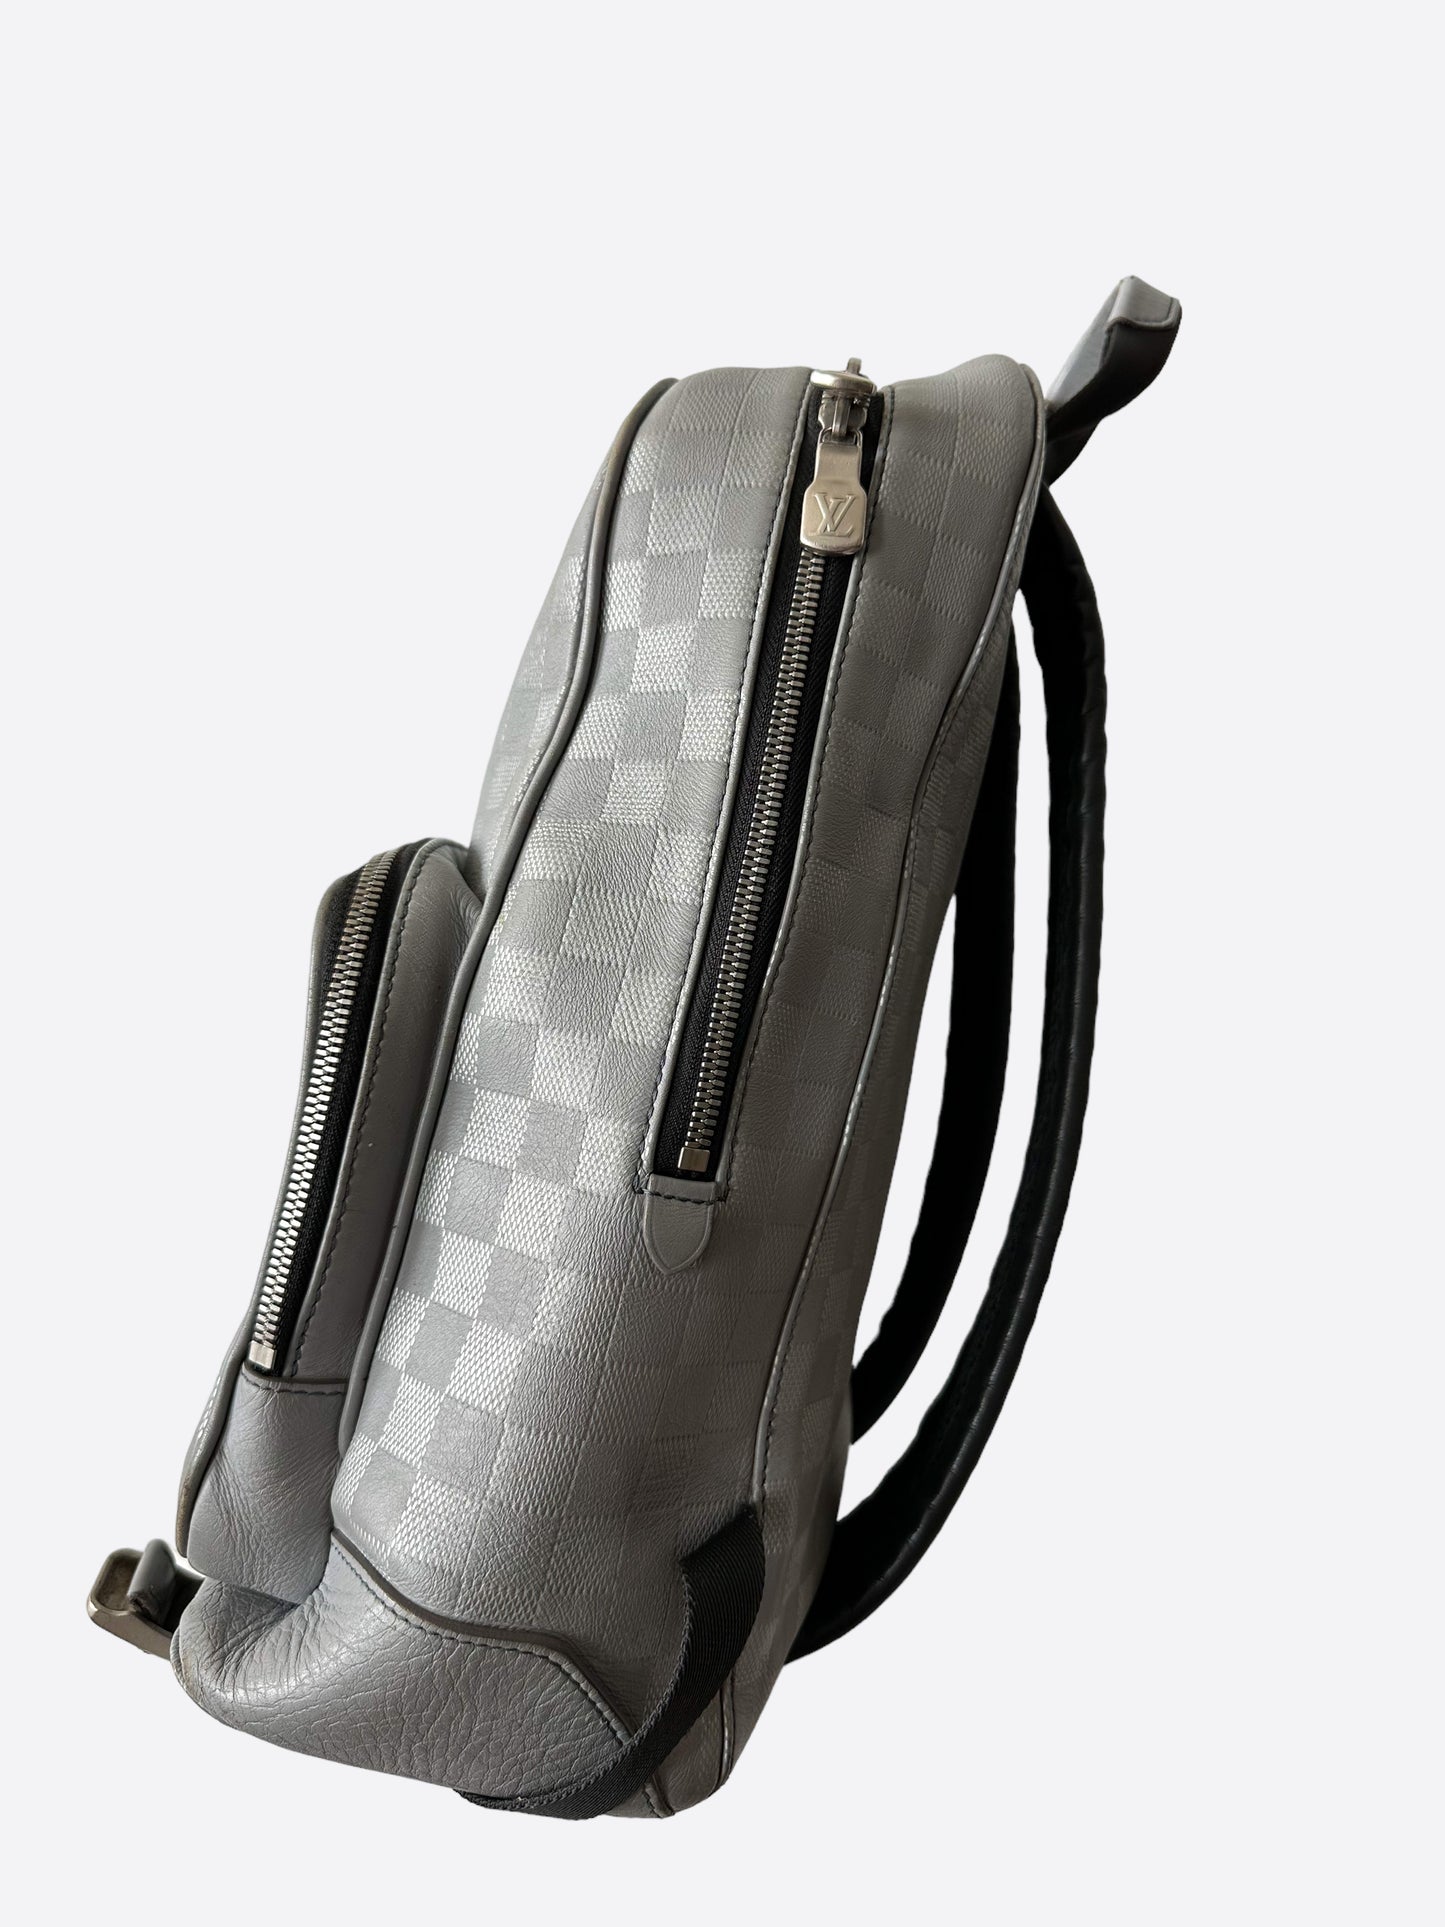 Shop Louis Vuitton DAMIER Campus backpack (N50021) by 12starsco